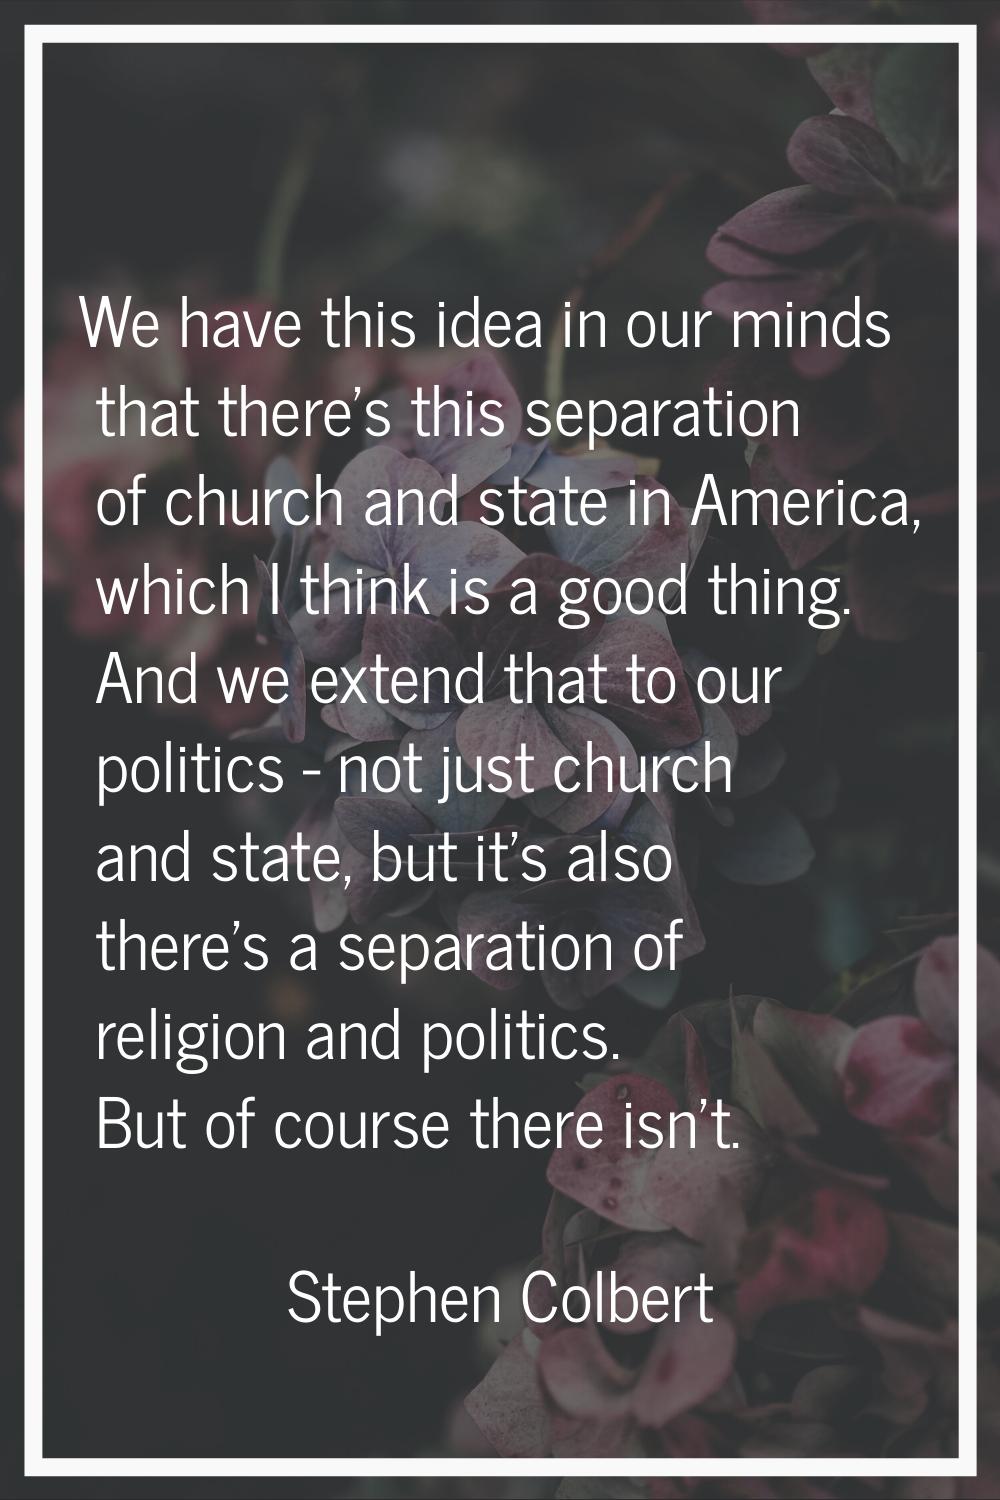 We have this idea in our minds that there's this separation of church and state in America, which I